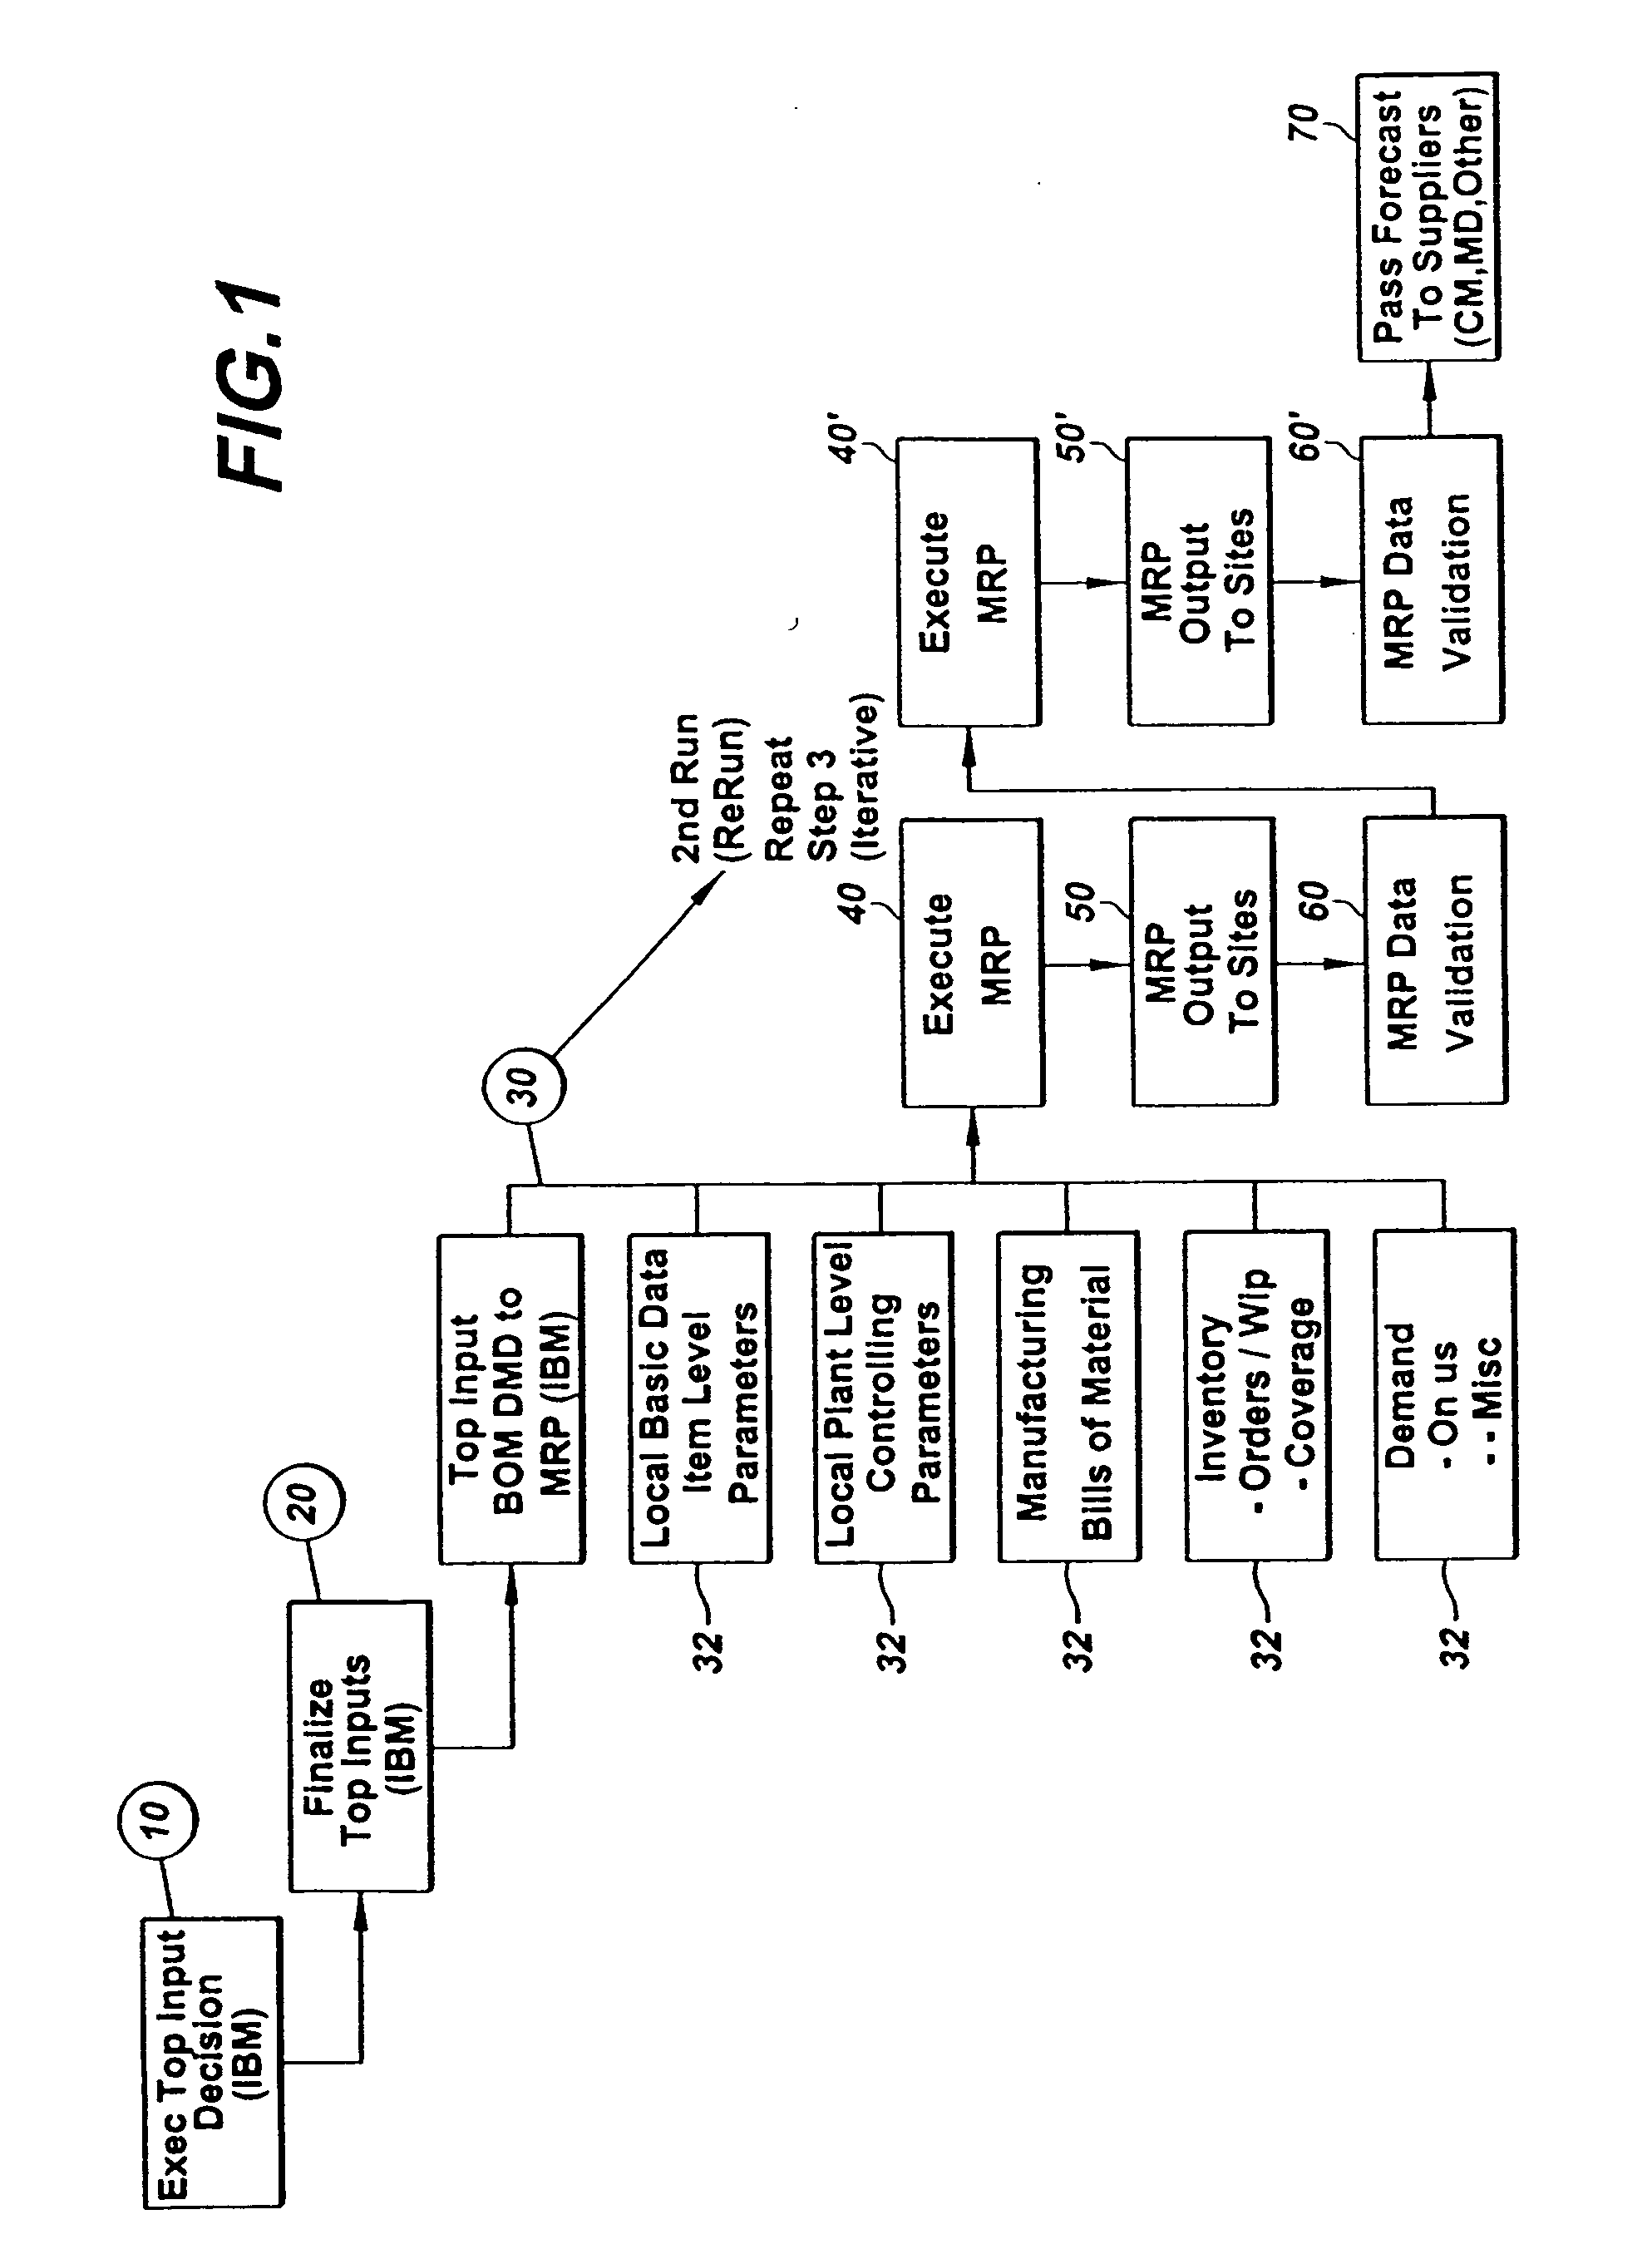 Method for supplier collaboration and data accuracy